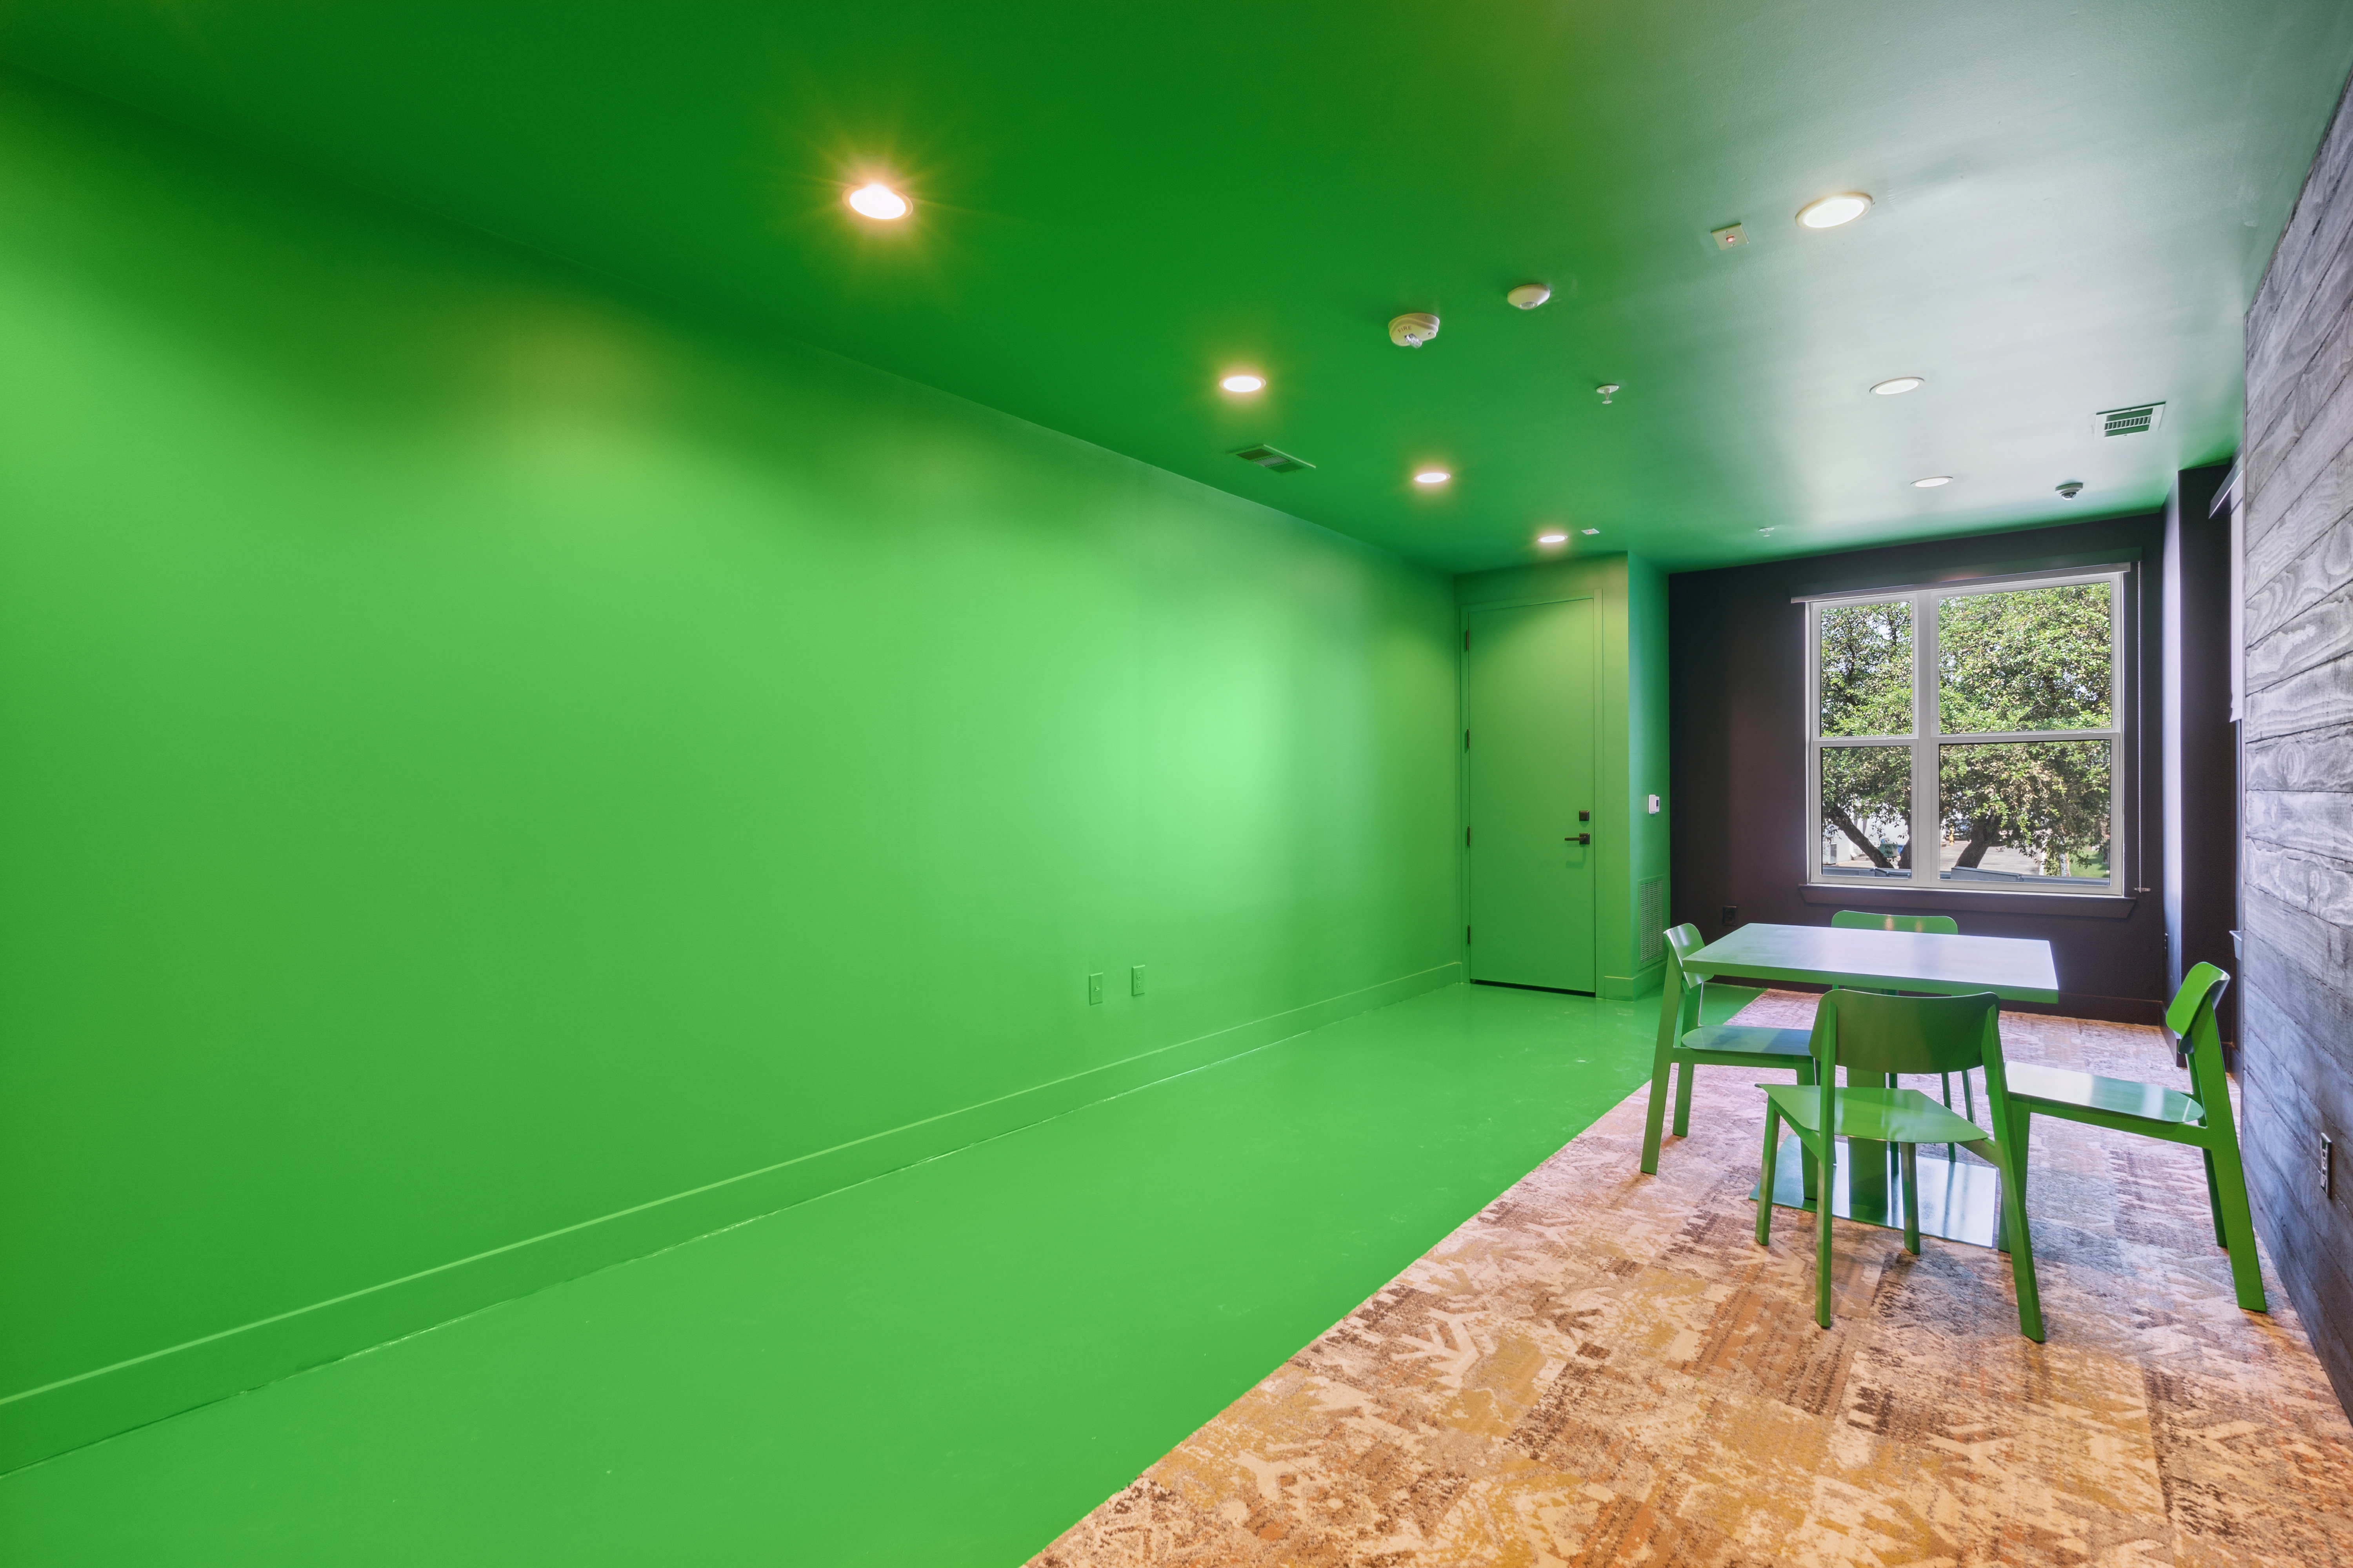 Chroma green covers the floor, ceiling and entire length of the wall until a window looks out at a historic tree. The room includes a chroma green table with four chairs.